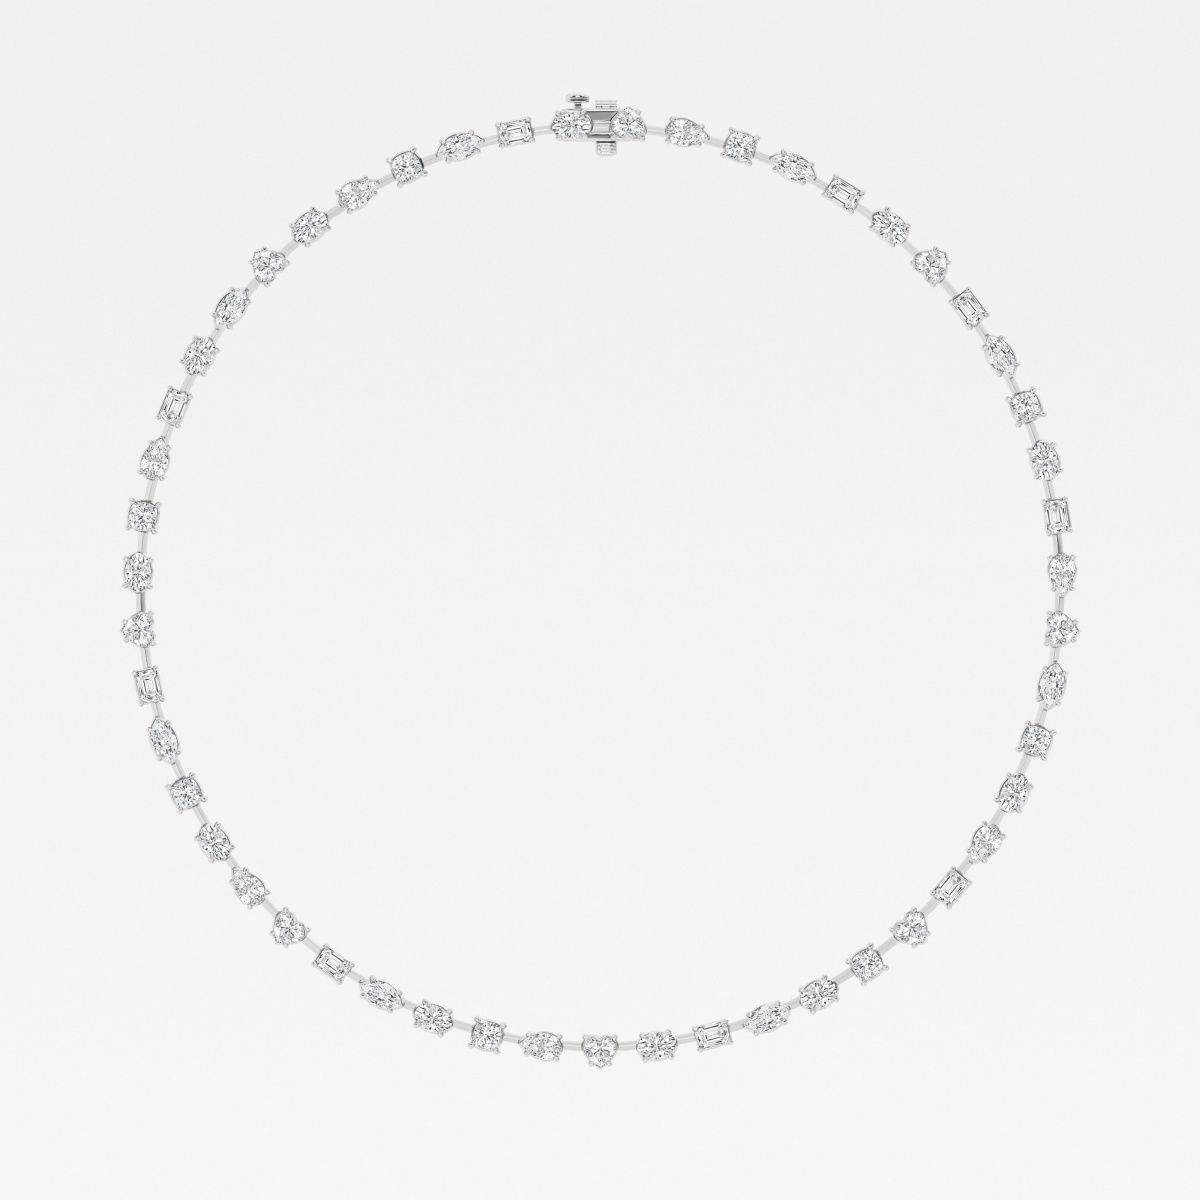 Additional Image 1 for  15 1/4 ctw Multi-Shape Lab Grown Diamond Tennis Necklace